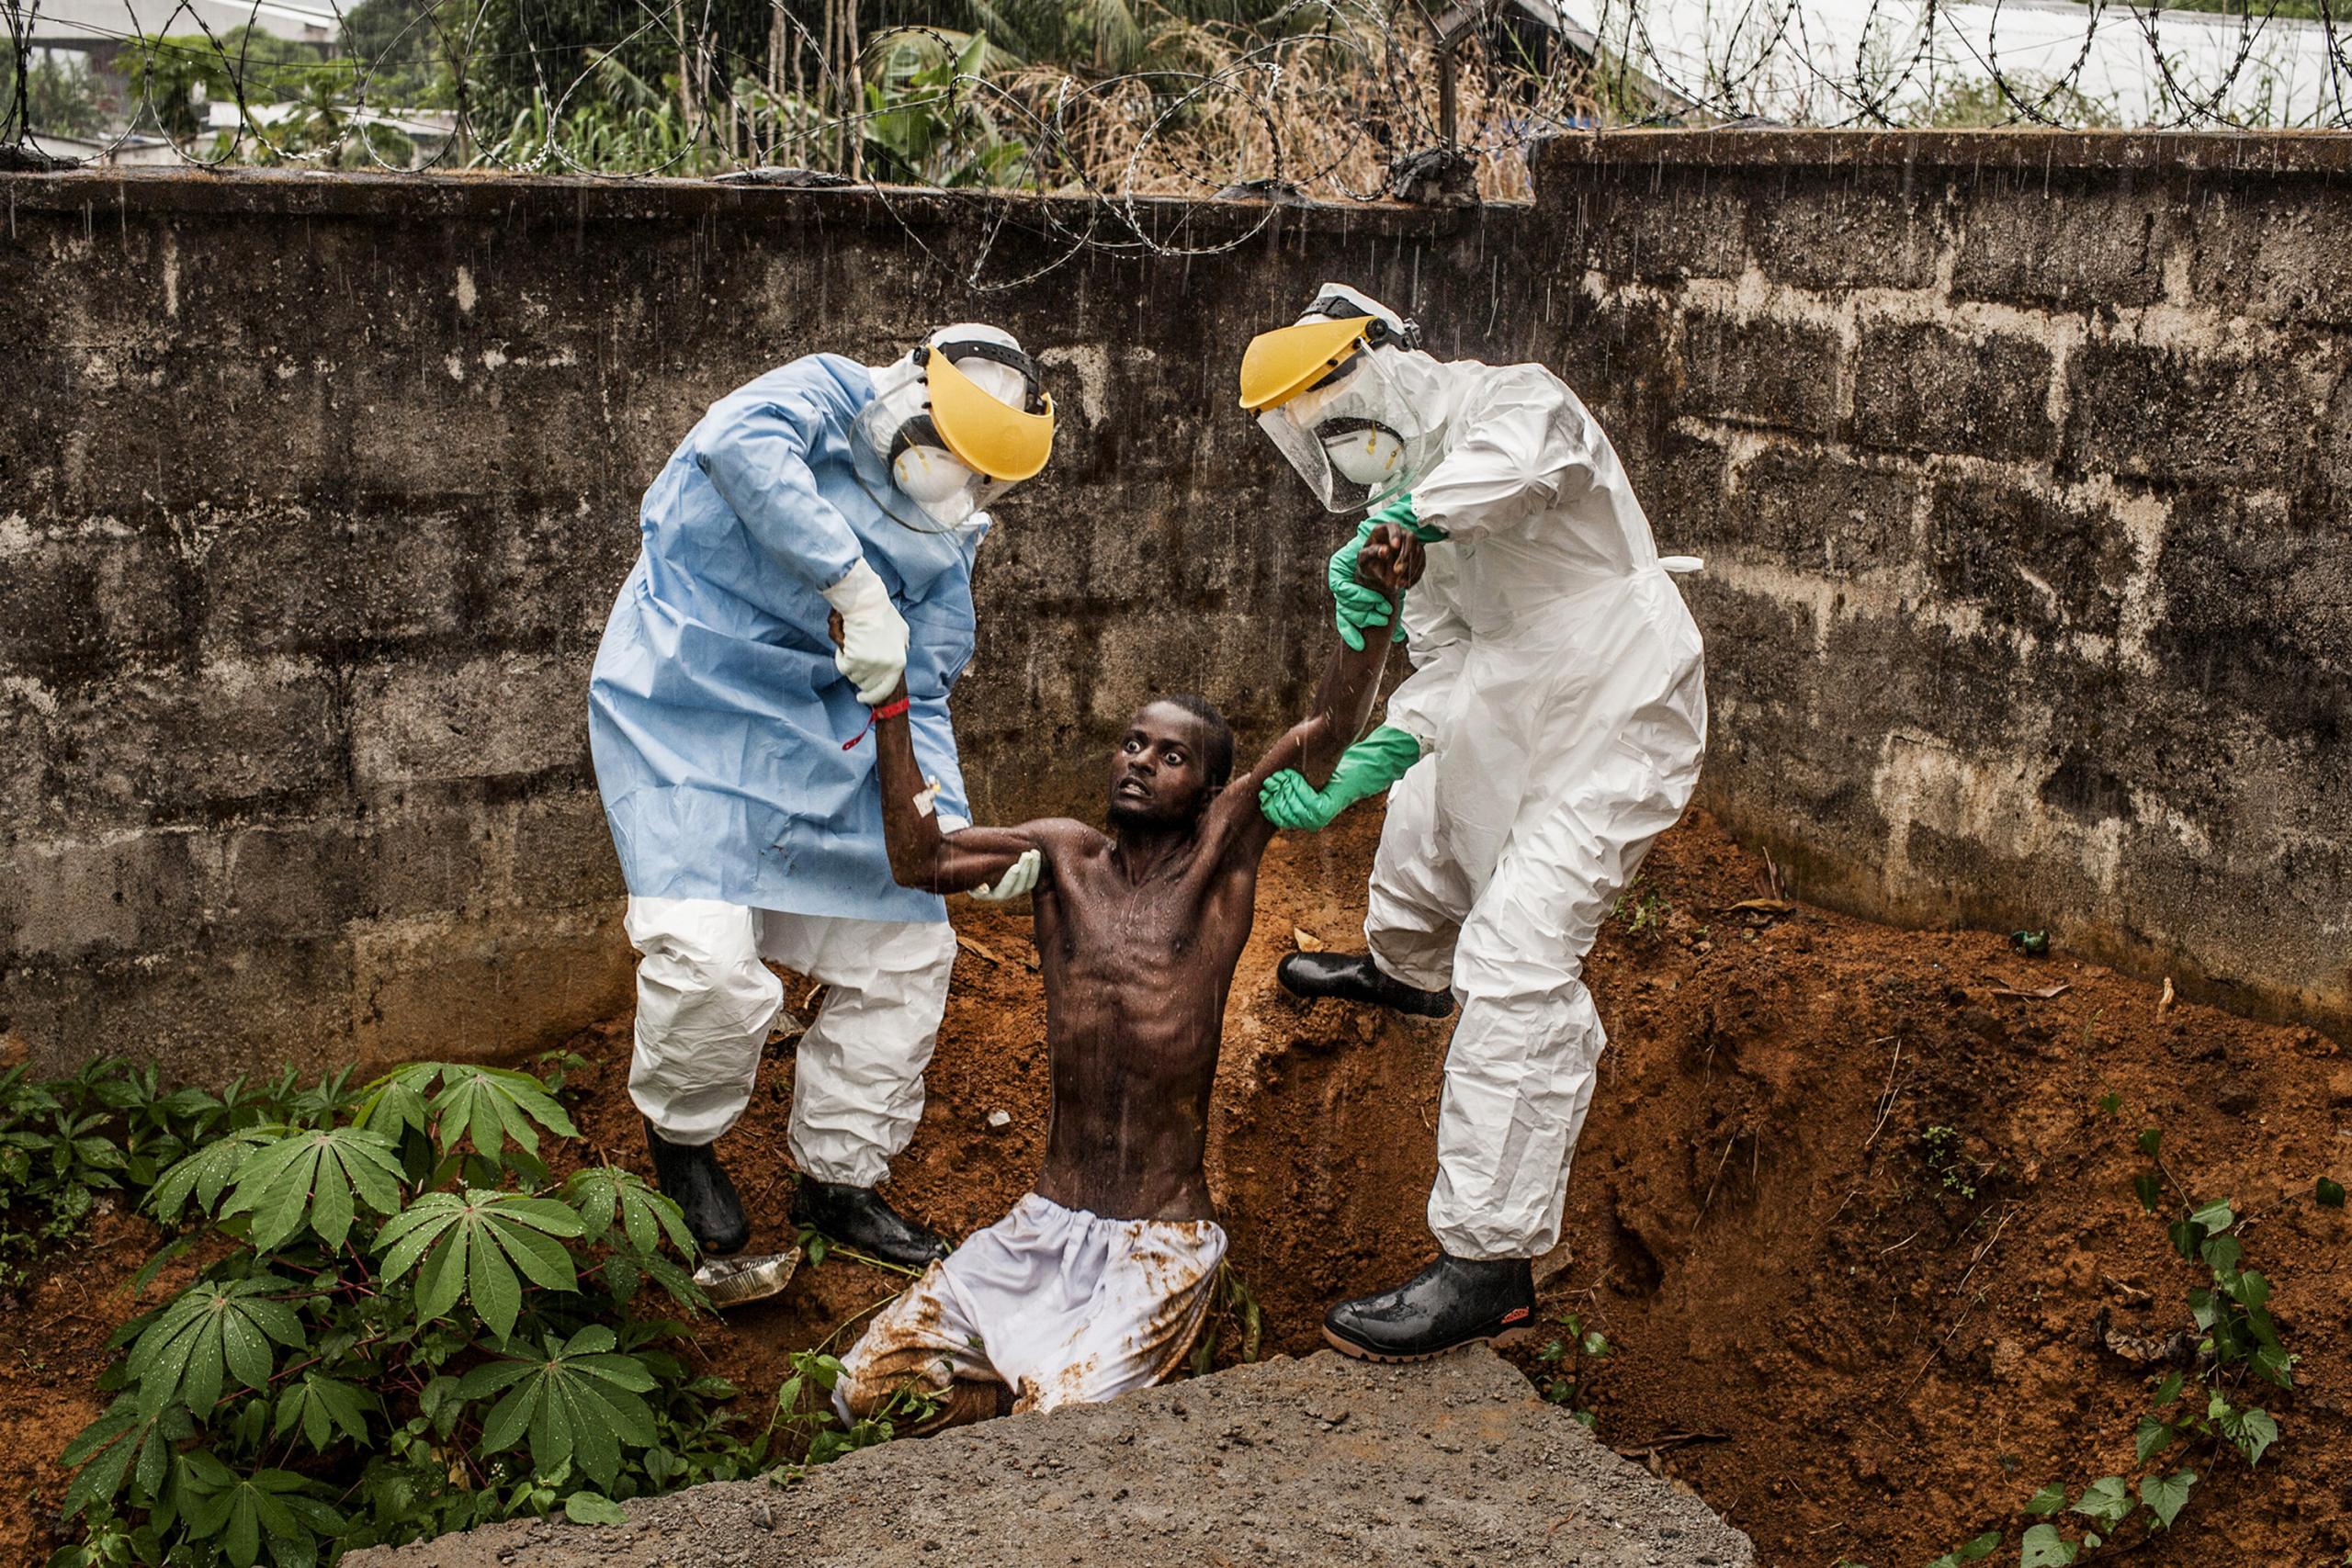 This desperate man trying to escape ebola in Sierra Leone.